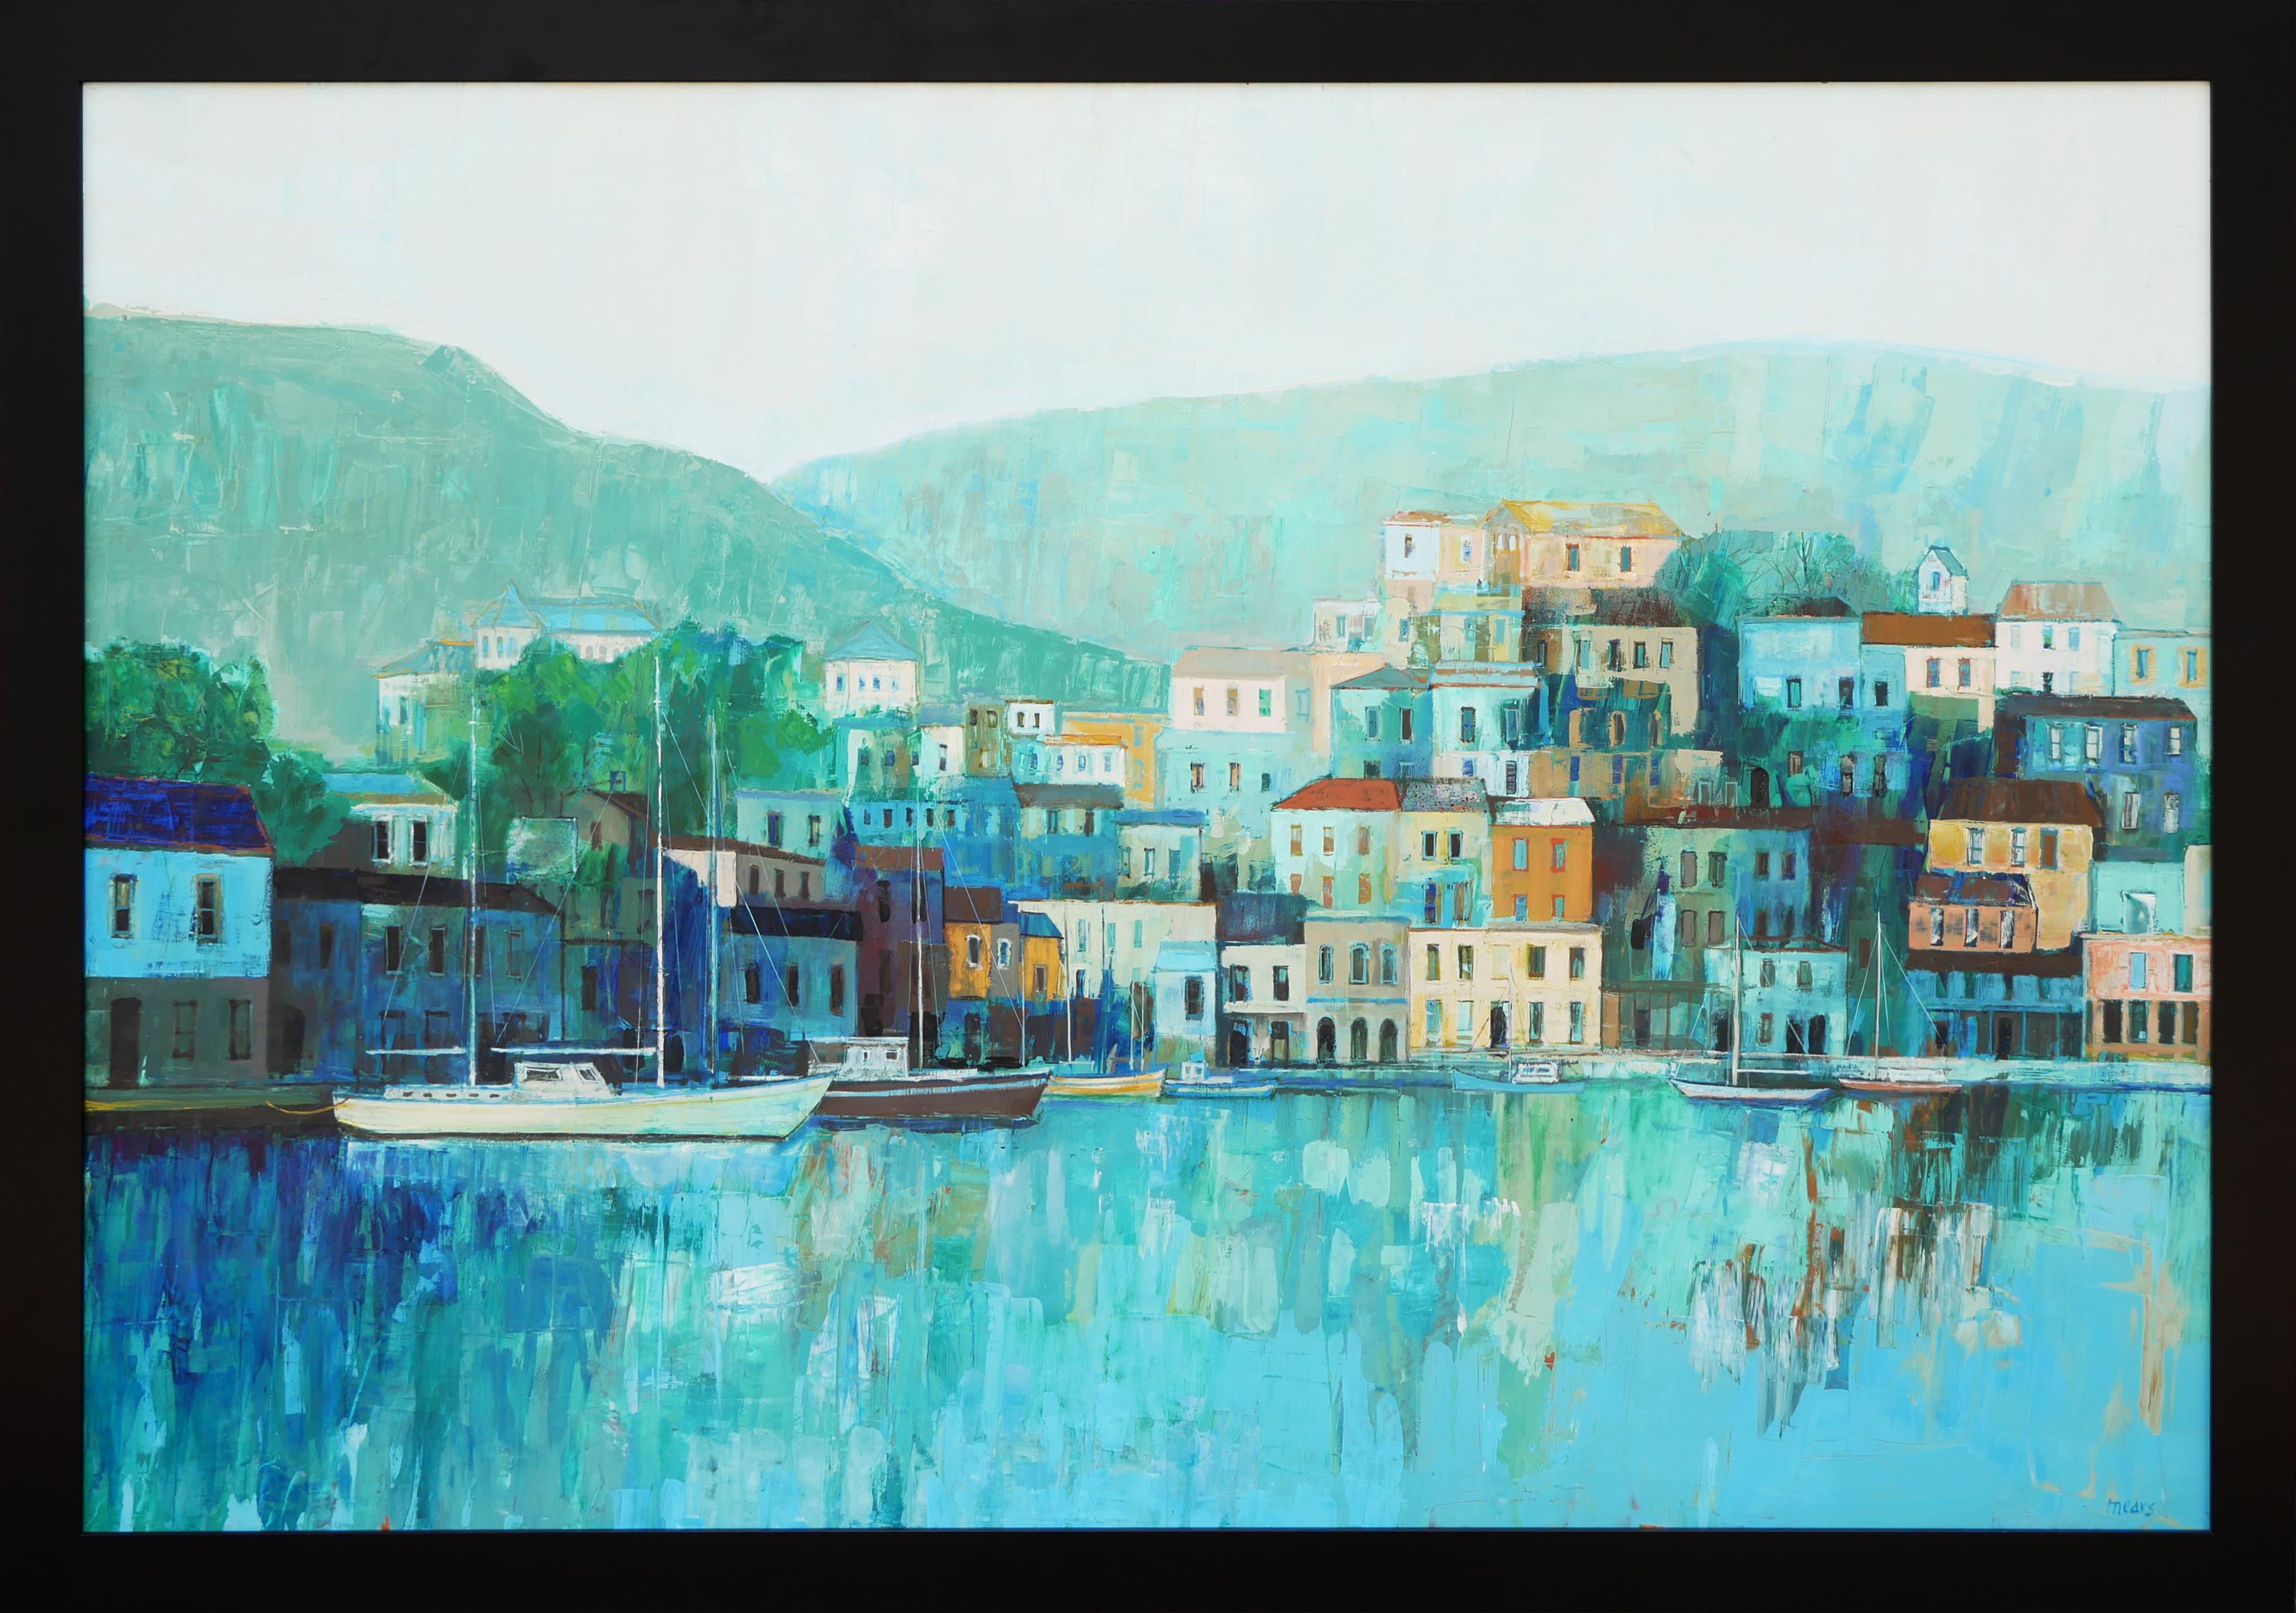 Herb Mears Landscape Painting - "Untitled - Village Point" Blue-Toned Cityscape Abstract Landscape